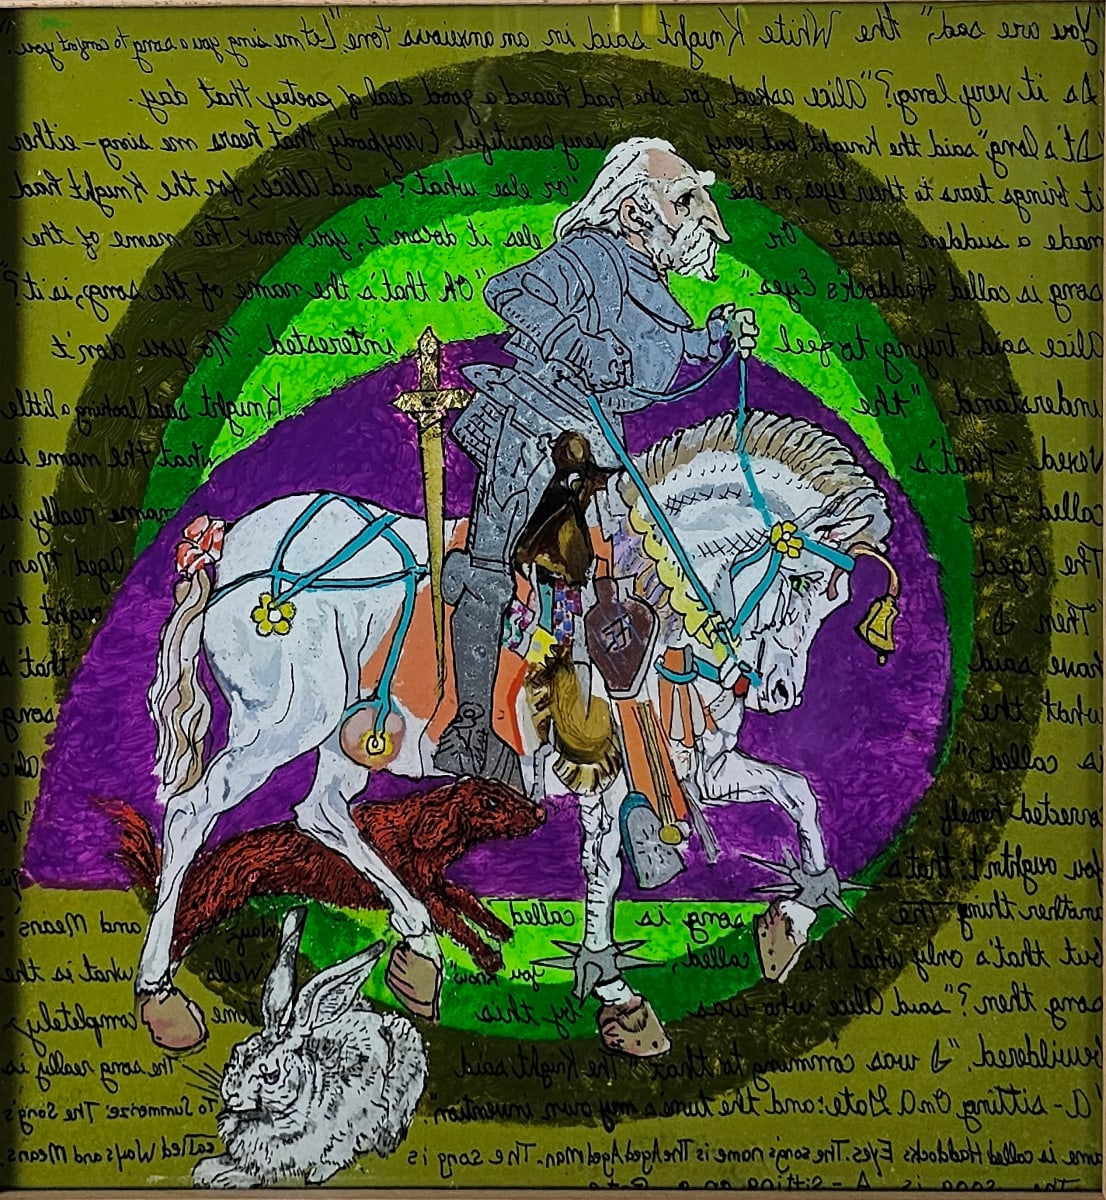 Equestrian Enigma by Debi Slowey-Raguso  Image: The White Knights reverse riddles on horseback.